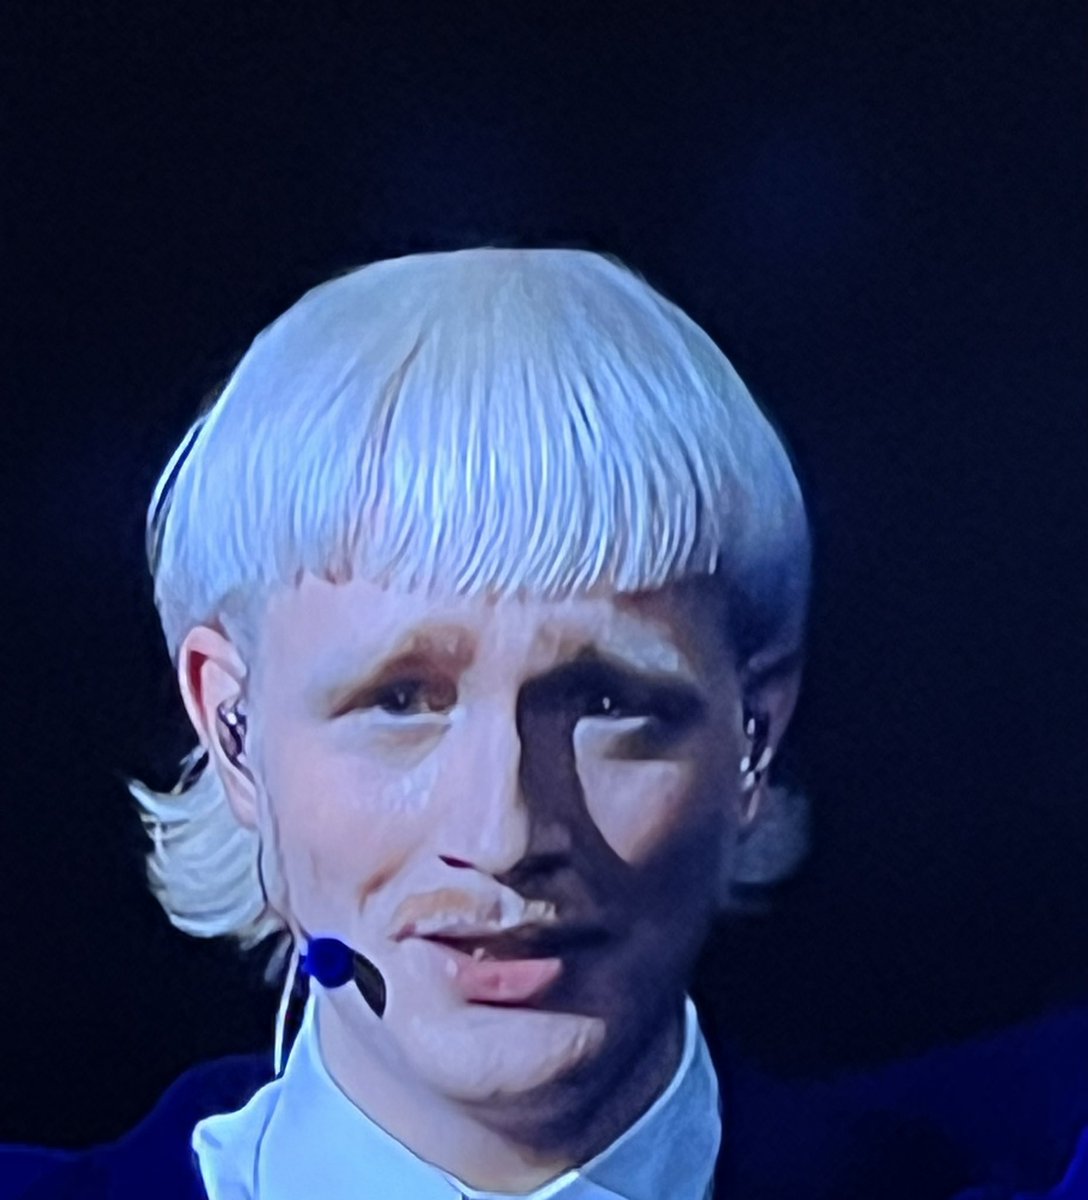 Classic bowl cut spotted tonight on @realclintonb - is the mullet no longer fashionable then?